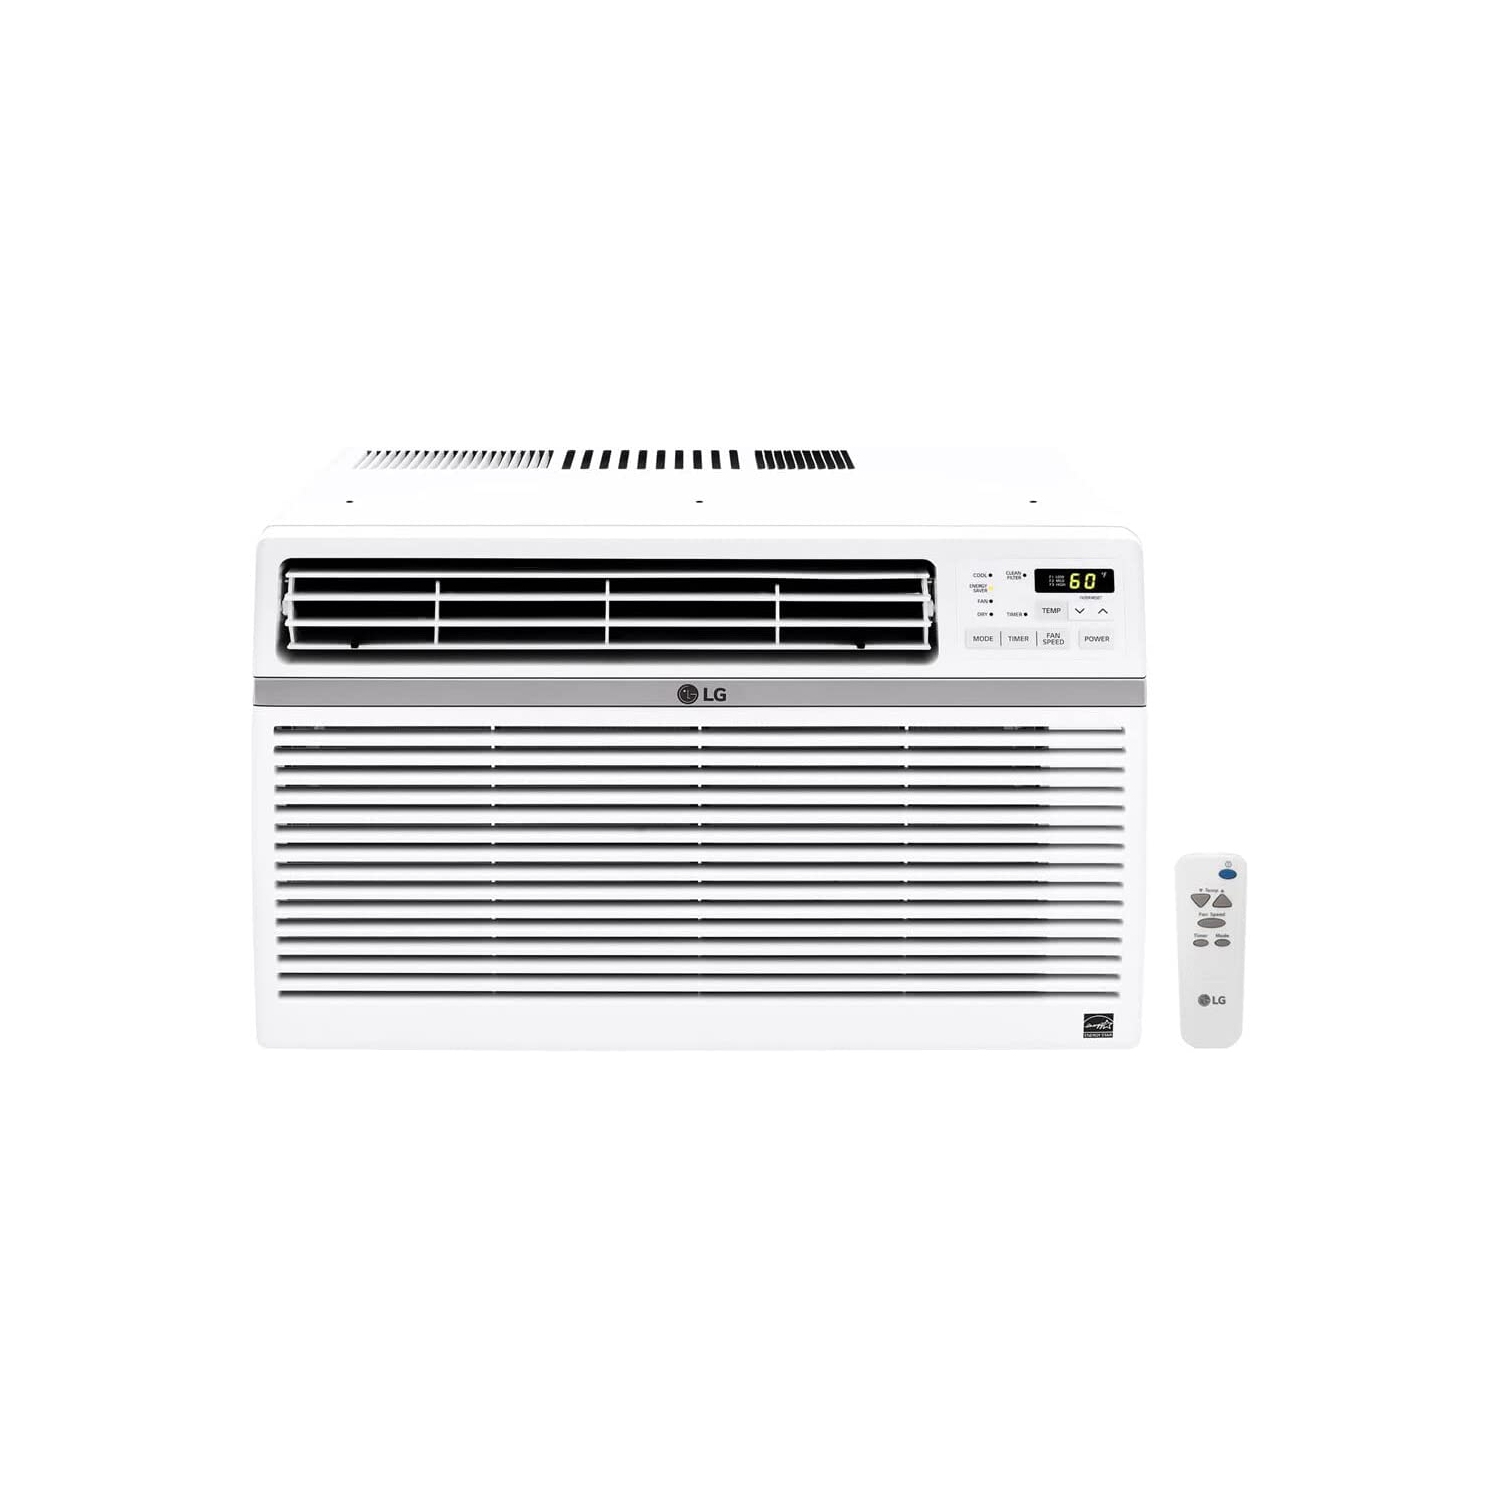 LG 18,000 BTU Window Air Conditioner, Cools 1,000 Sq.Ft. (25' x 40' Room Size), Quiet Operation, 3 Cooling Speeds, Auto Restart, Energy star with Remote 230/208V (LW1816ER)